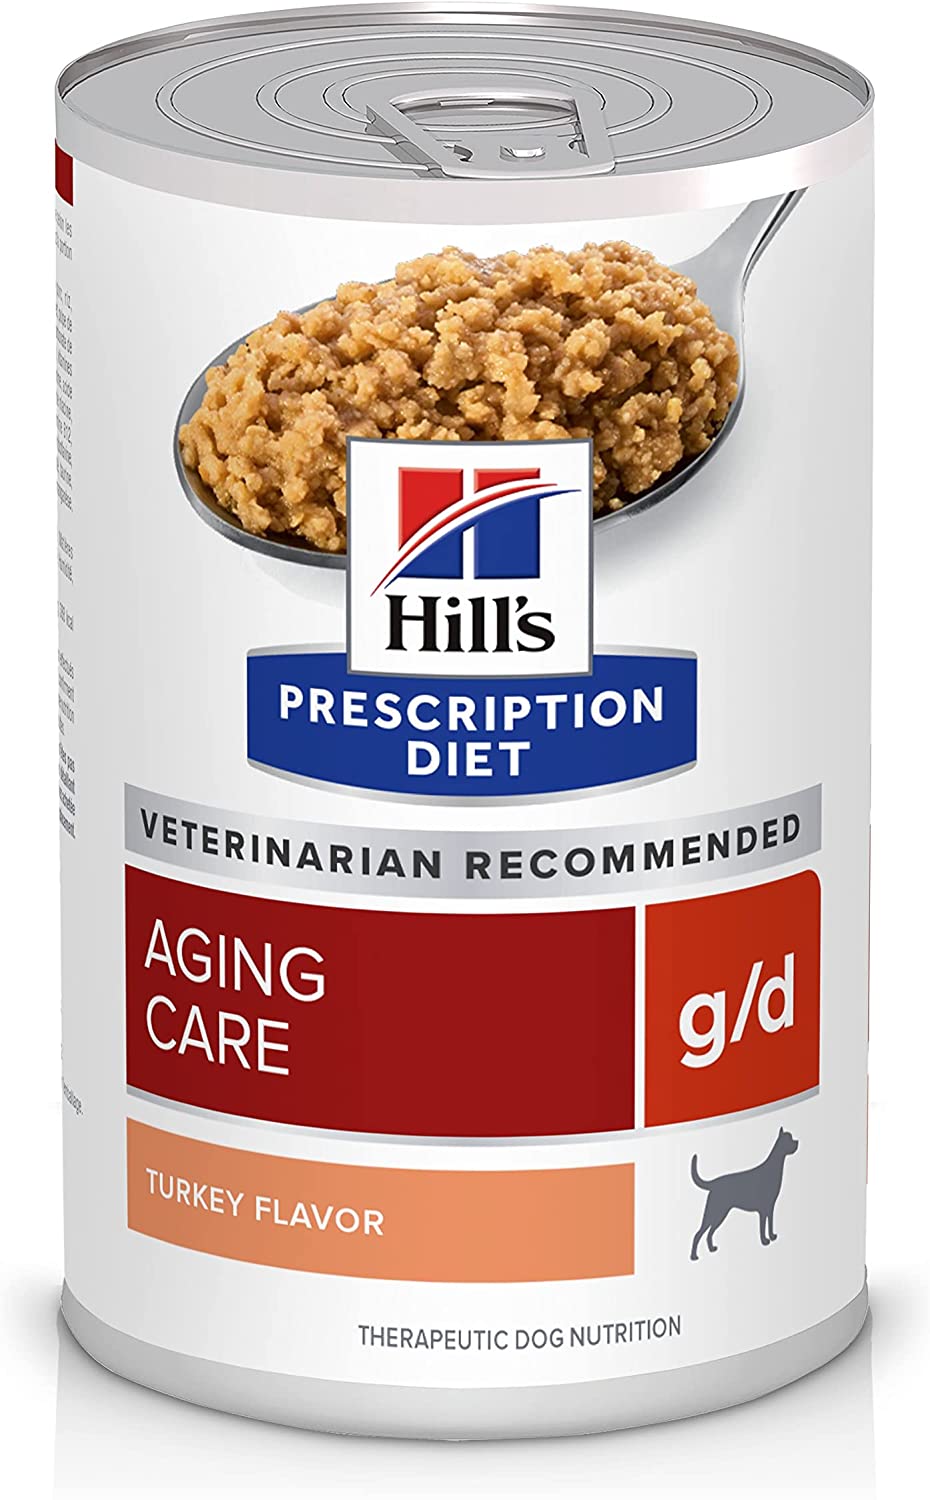 Hill_s Prescription Diet g d Aging Care Turkey Flavor Canned Dog Food